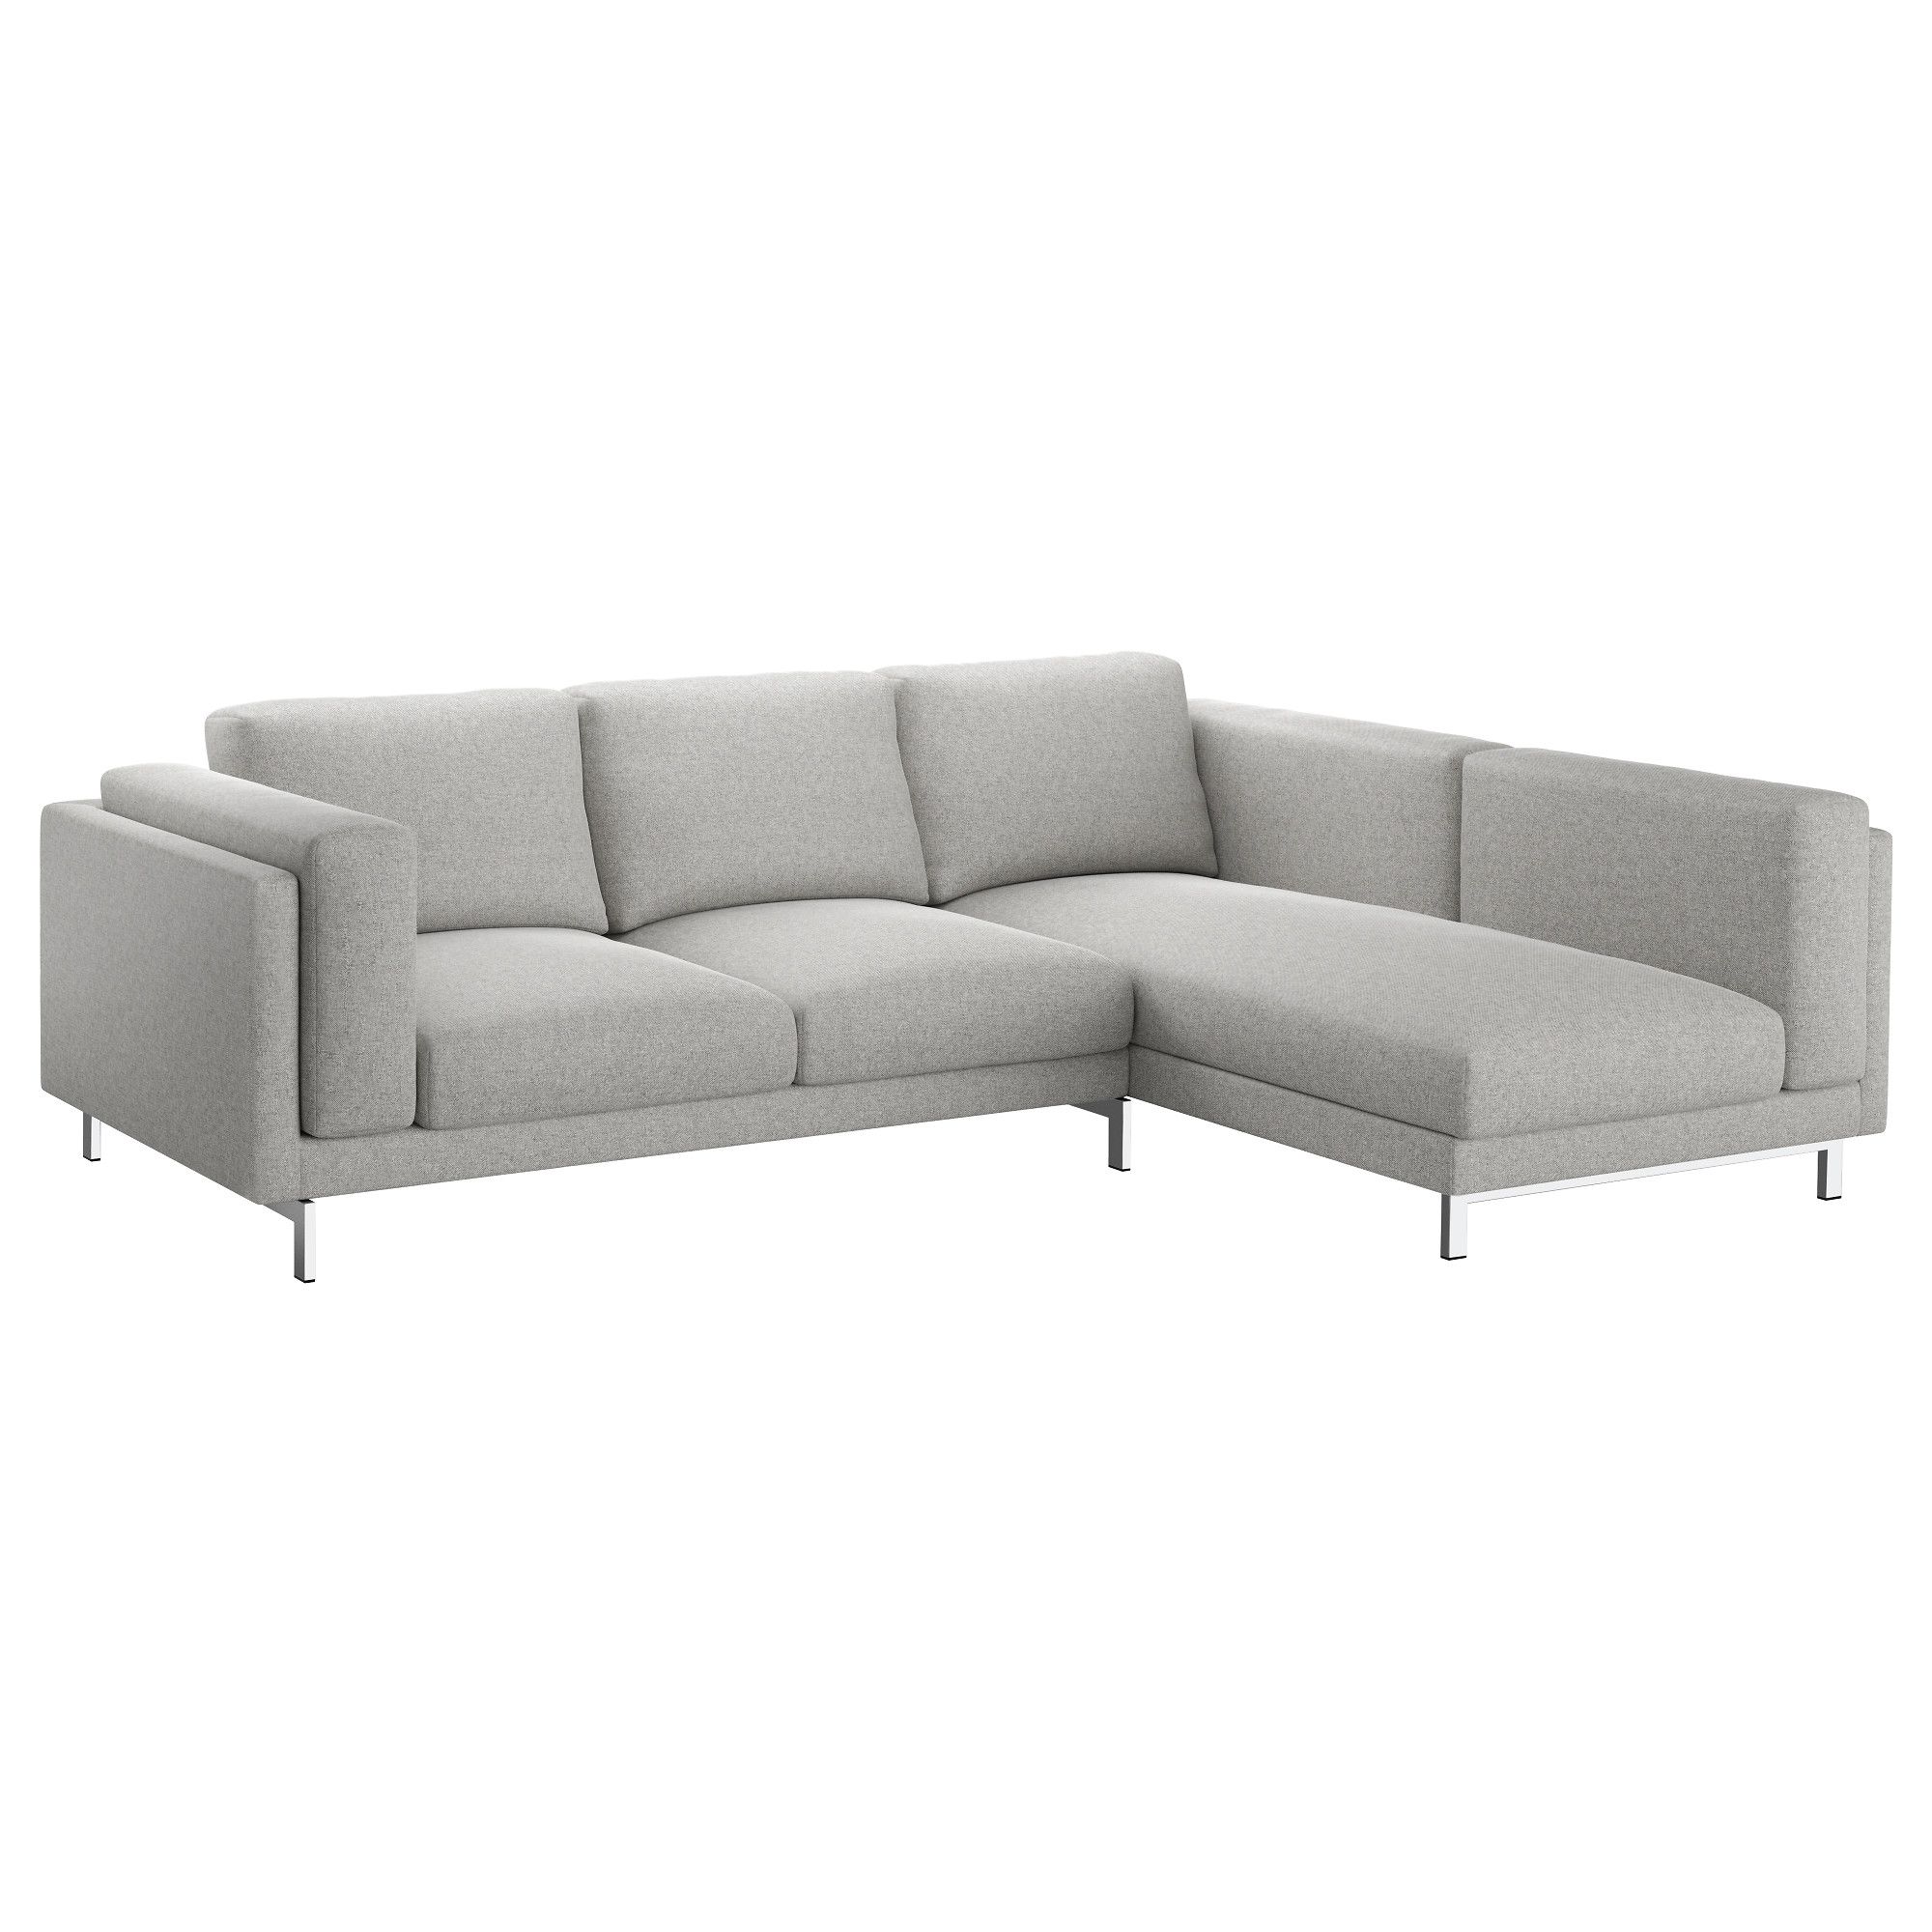 Widely Used Grey Sofas With Chaise For Nockeby Sofa – With Chaise, Left/tallmyra White/black, Chrome (View 14 of 15)